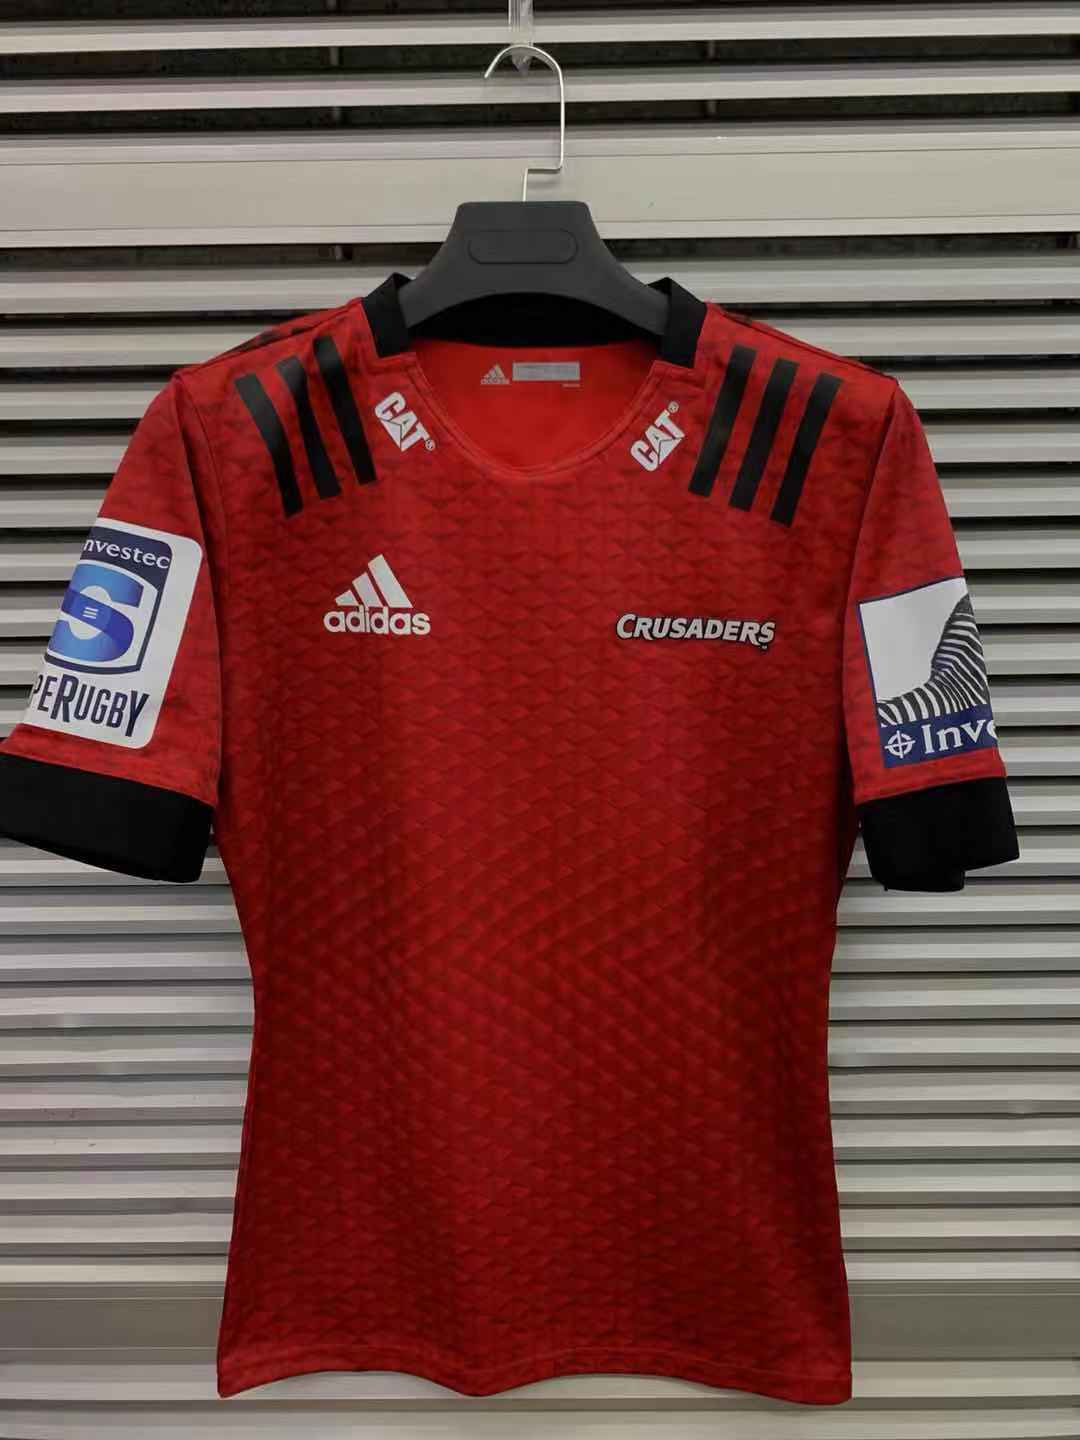 Super 15 Crusaders 2020 Men's Rugby Jersey S-5XL